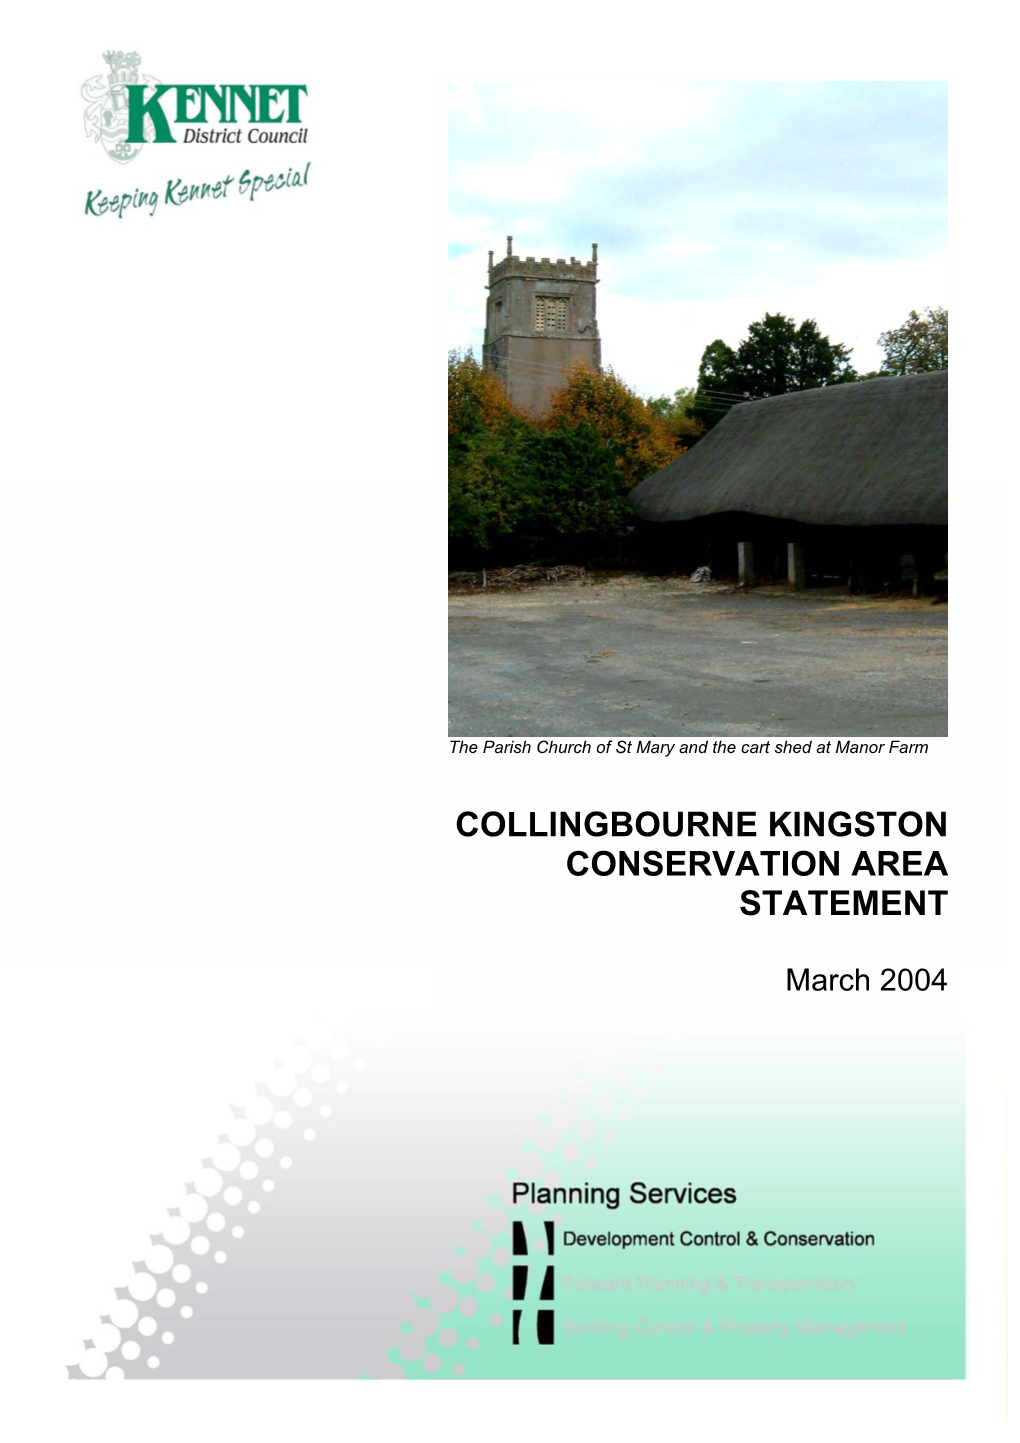 Collingbourne Kingston Conservation Area Statement Is Part of the Process